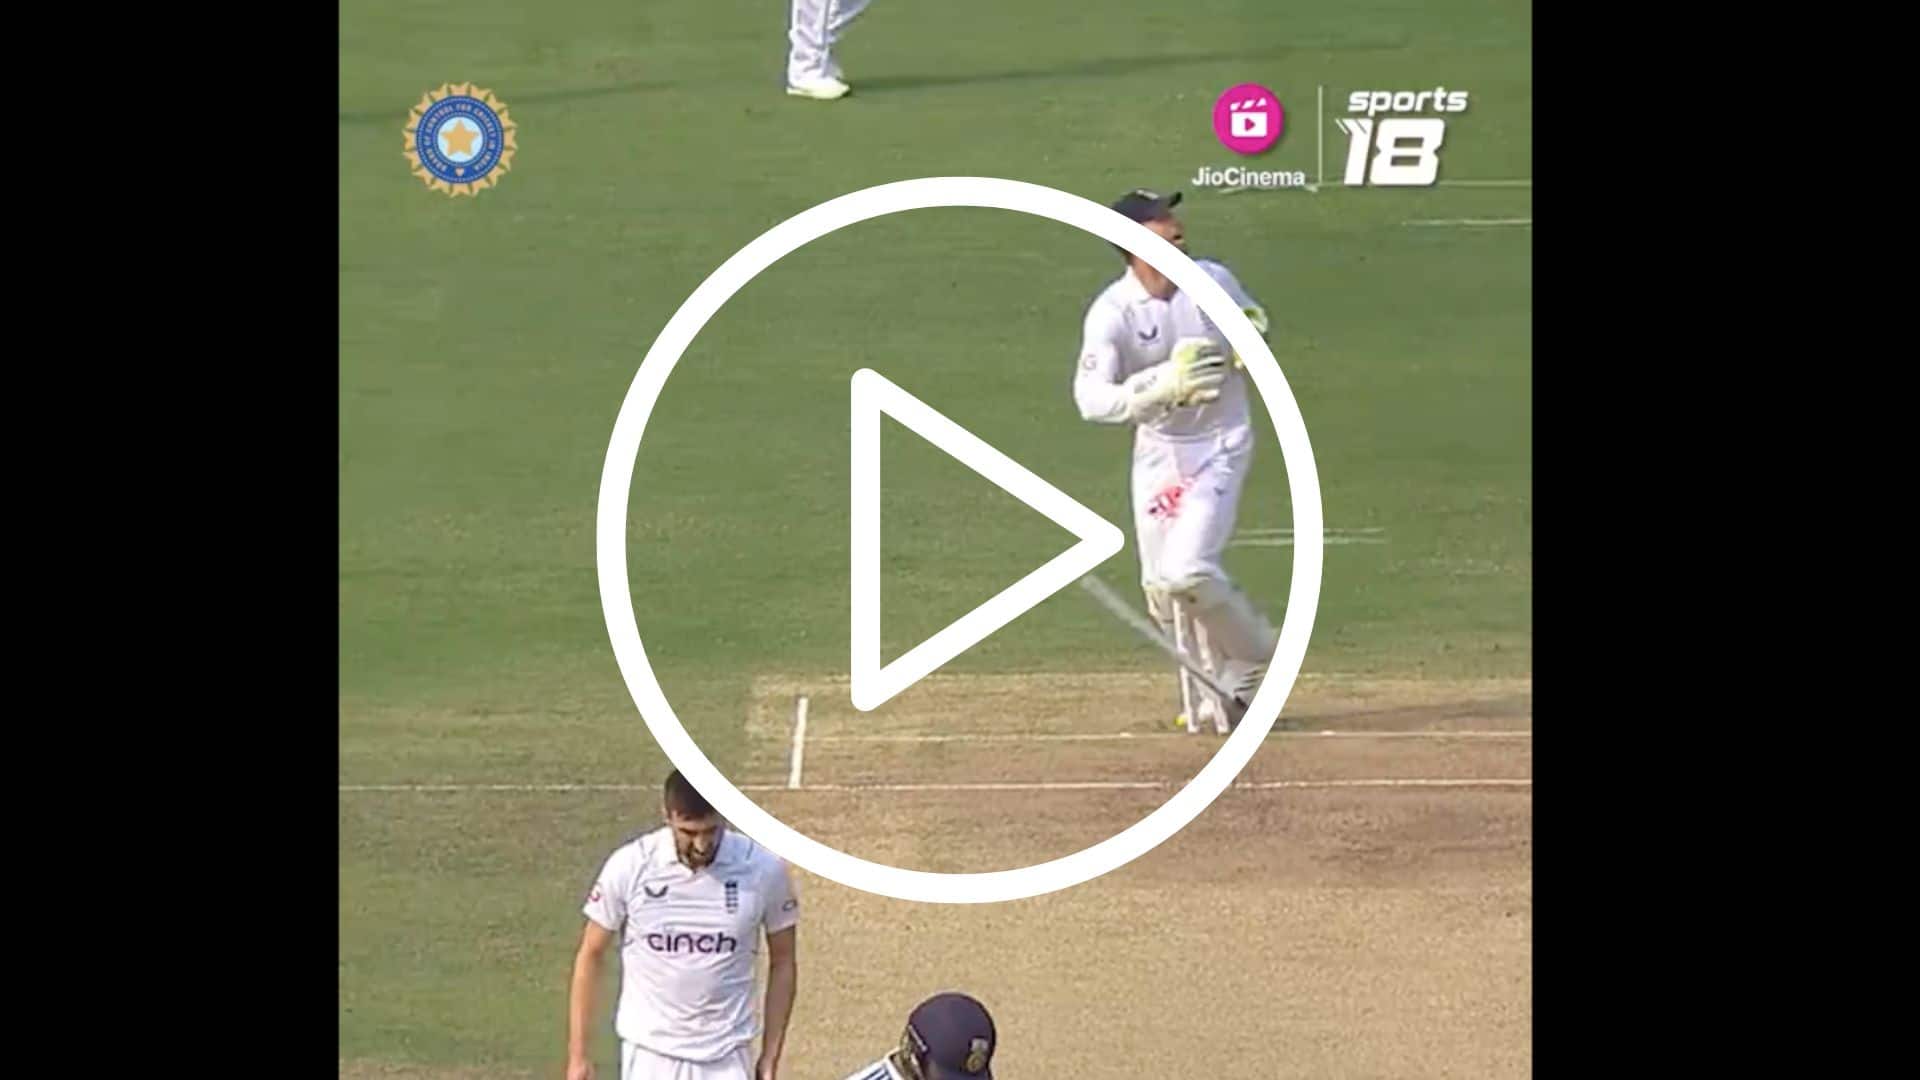 [Watch] Ben Foakes Knocks Over Stumps and Tumbles In Comical Fielding Mishap